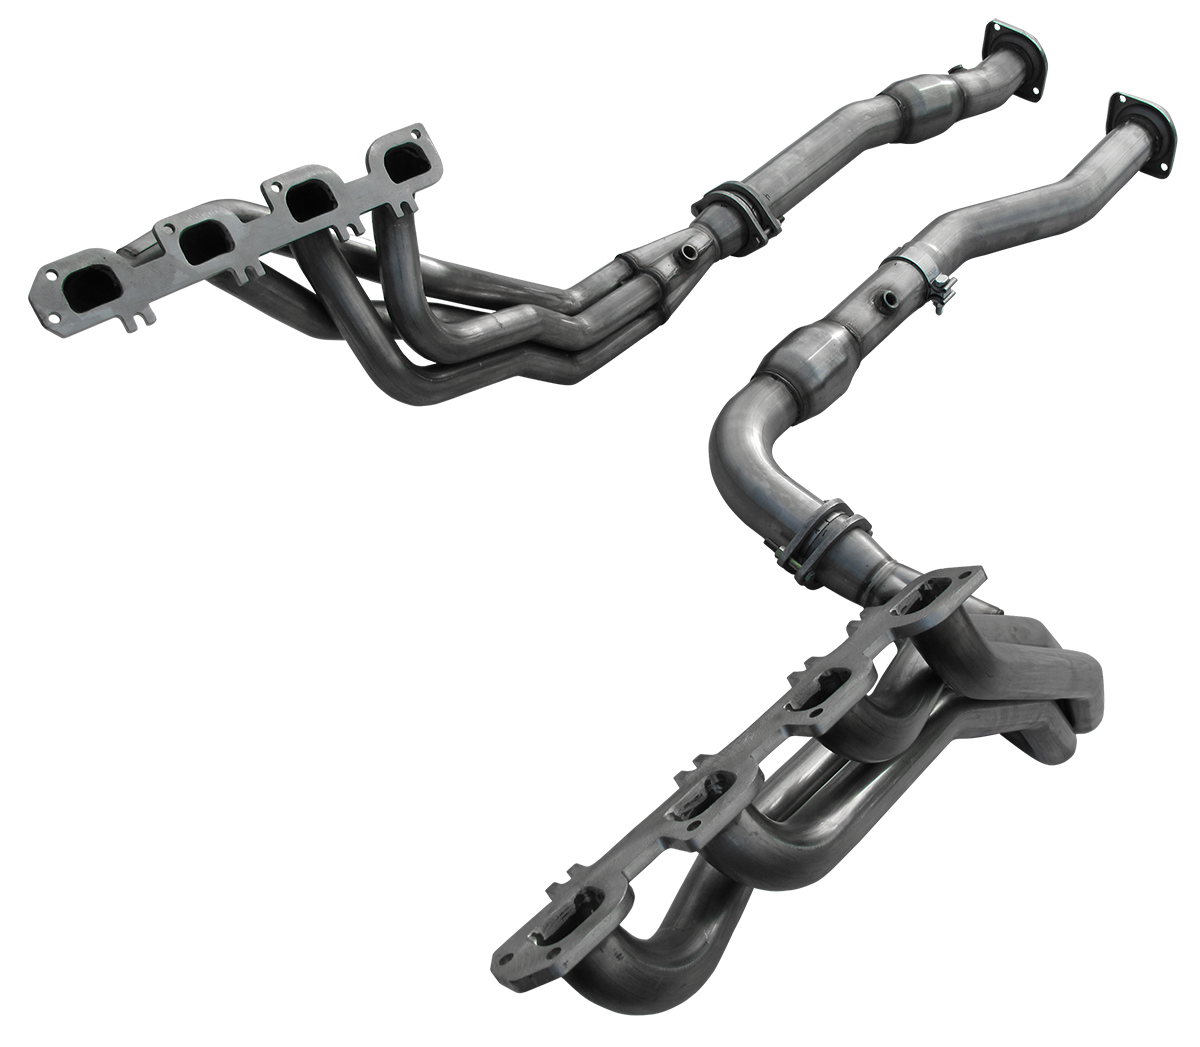 2006-2010 Jeep SRT8 6.1L V8 American Racing Headers 1 7/8" x 3" Long Tube Headers w/3" Catted Connection Pipes